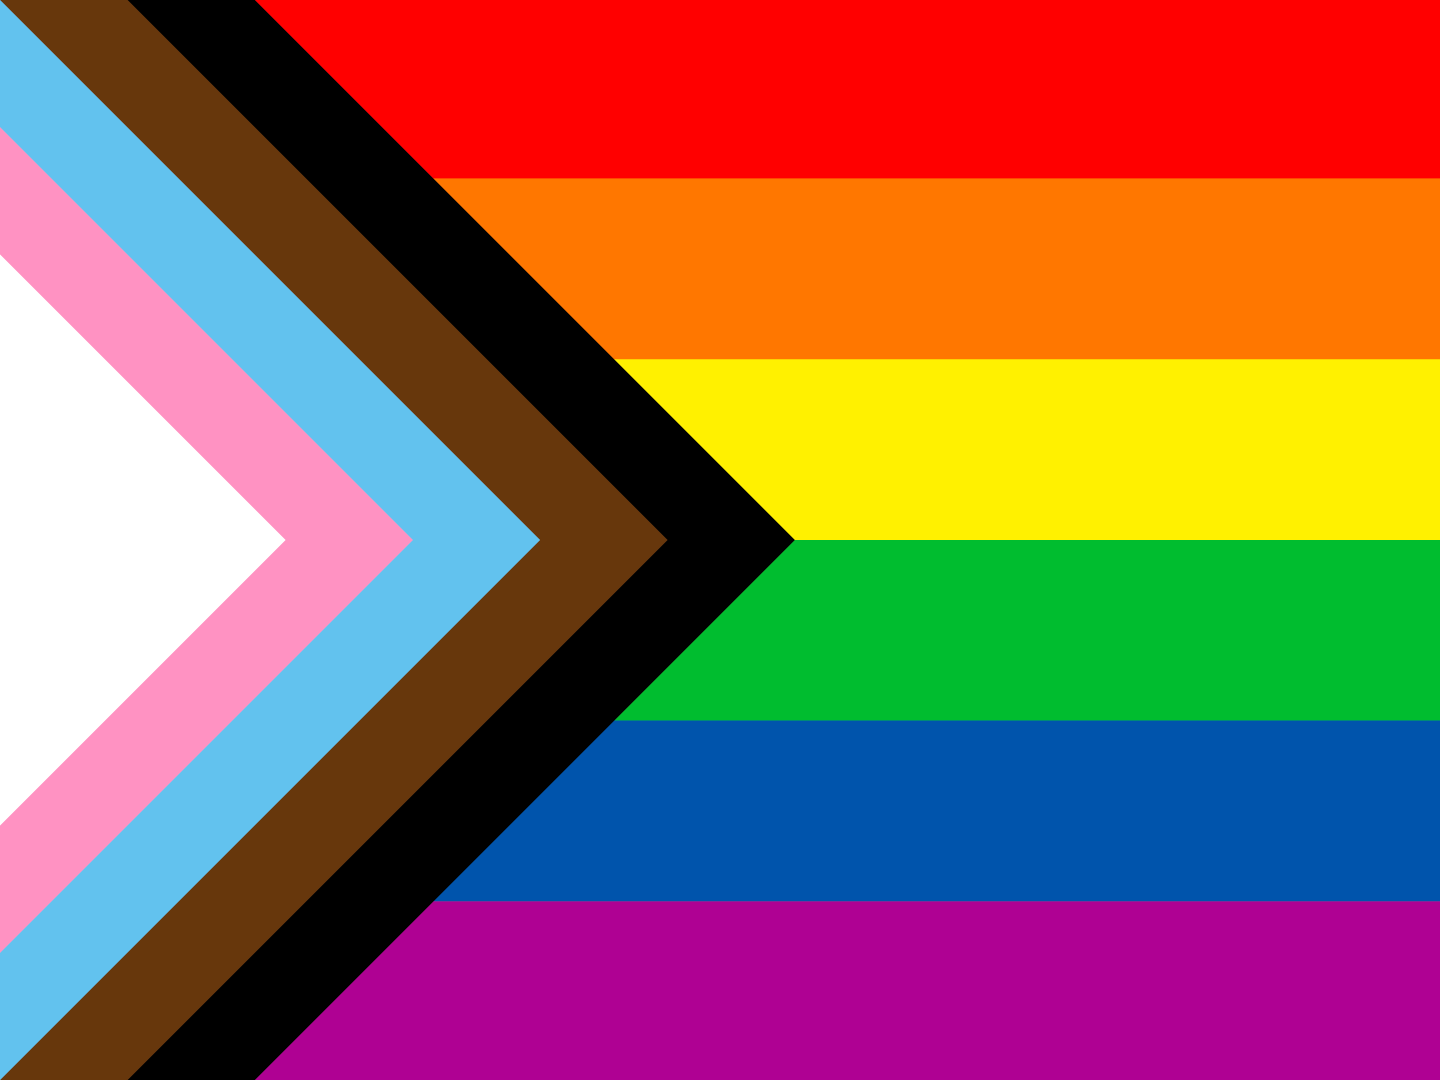 Pride flag image/ Positive space image is pixelated 